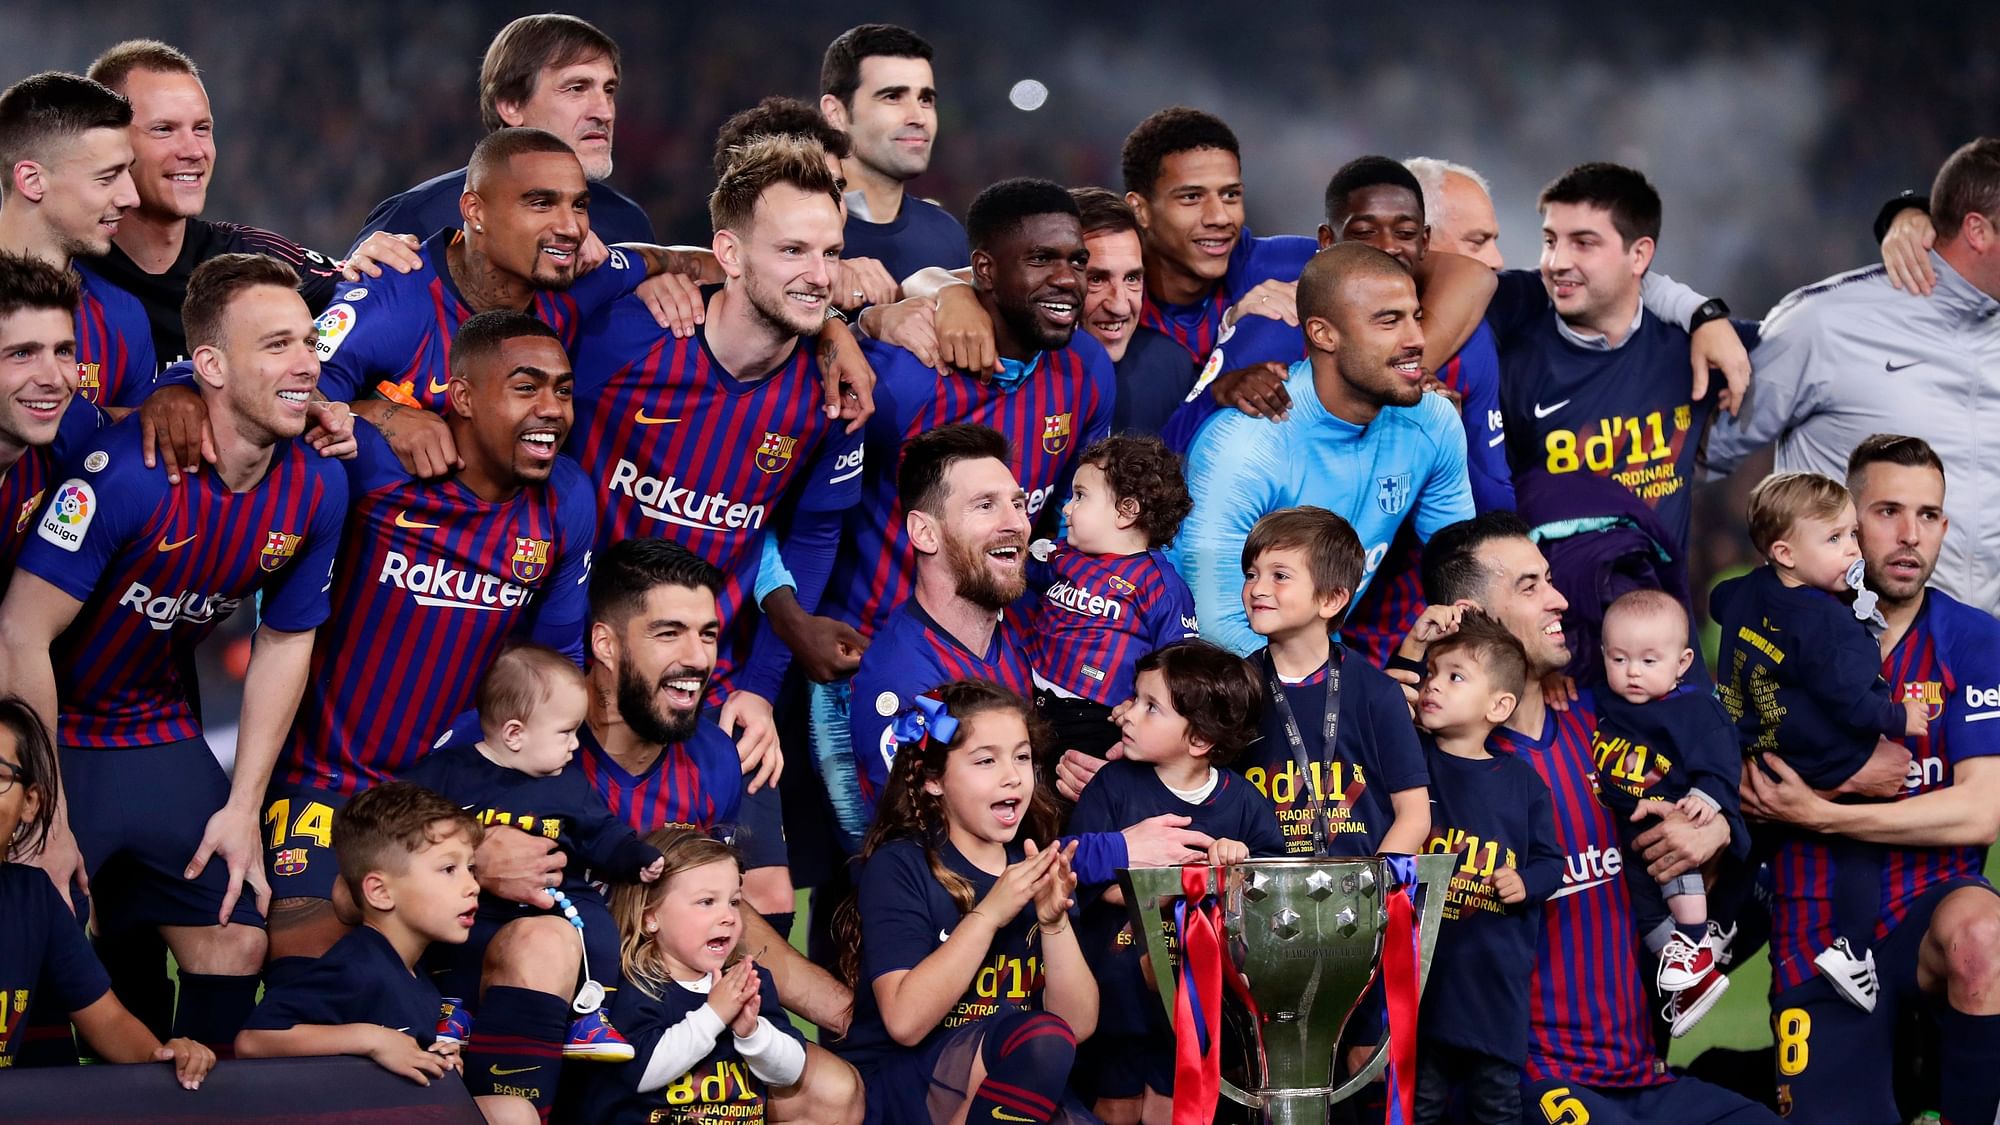 The 10th edition of the survey finds Barcelona atop the list with an average basic salary of a first team player of $12.8 million.